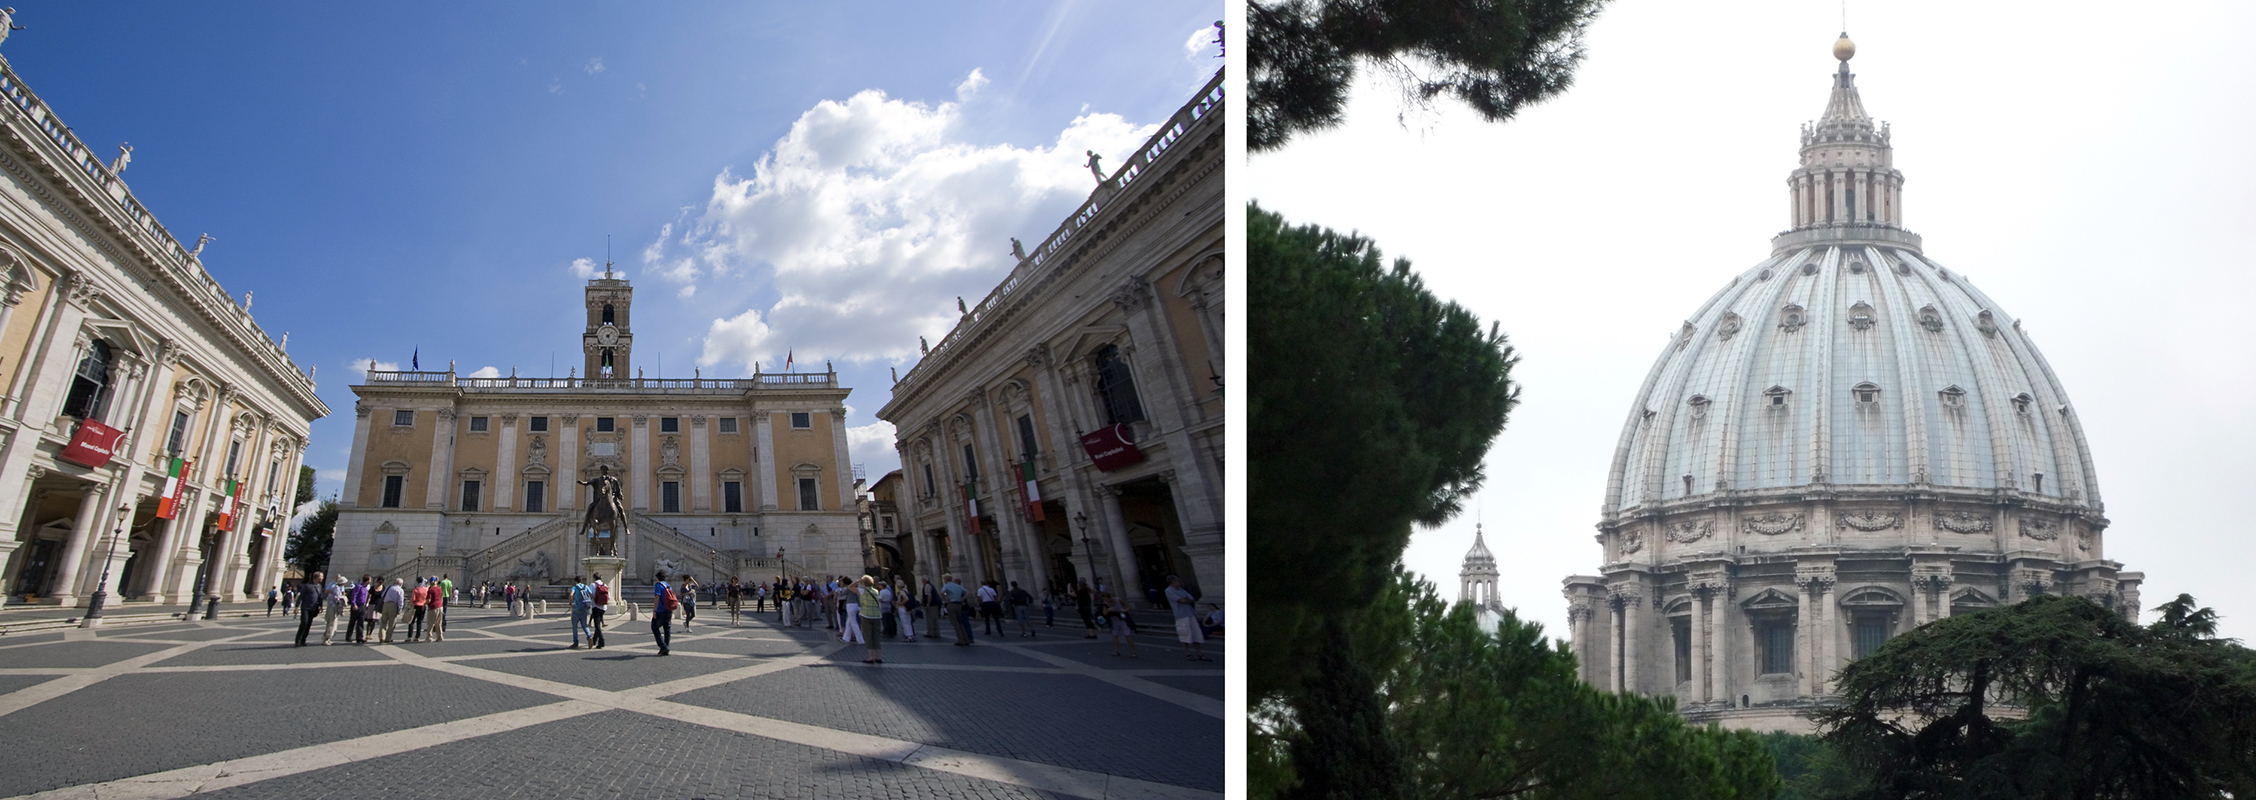 Left: Michelangelo, Piazza and palazzi of the Capitoline Hill, Rome, 1536–1546 (photo: Lawrence OP, CC BY-NC-ND 2.0); Right: Michelangelo, Dome of St. Peter’s Basilica, Vatican City, Rome, 1546–1564 (photo: Steven Zucker, CC BY-NC-SA 2.0)